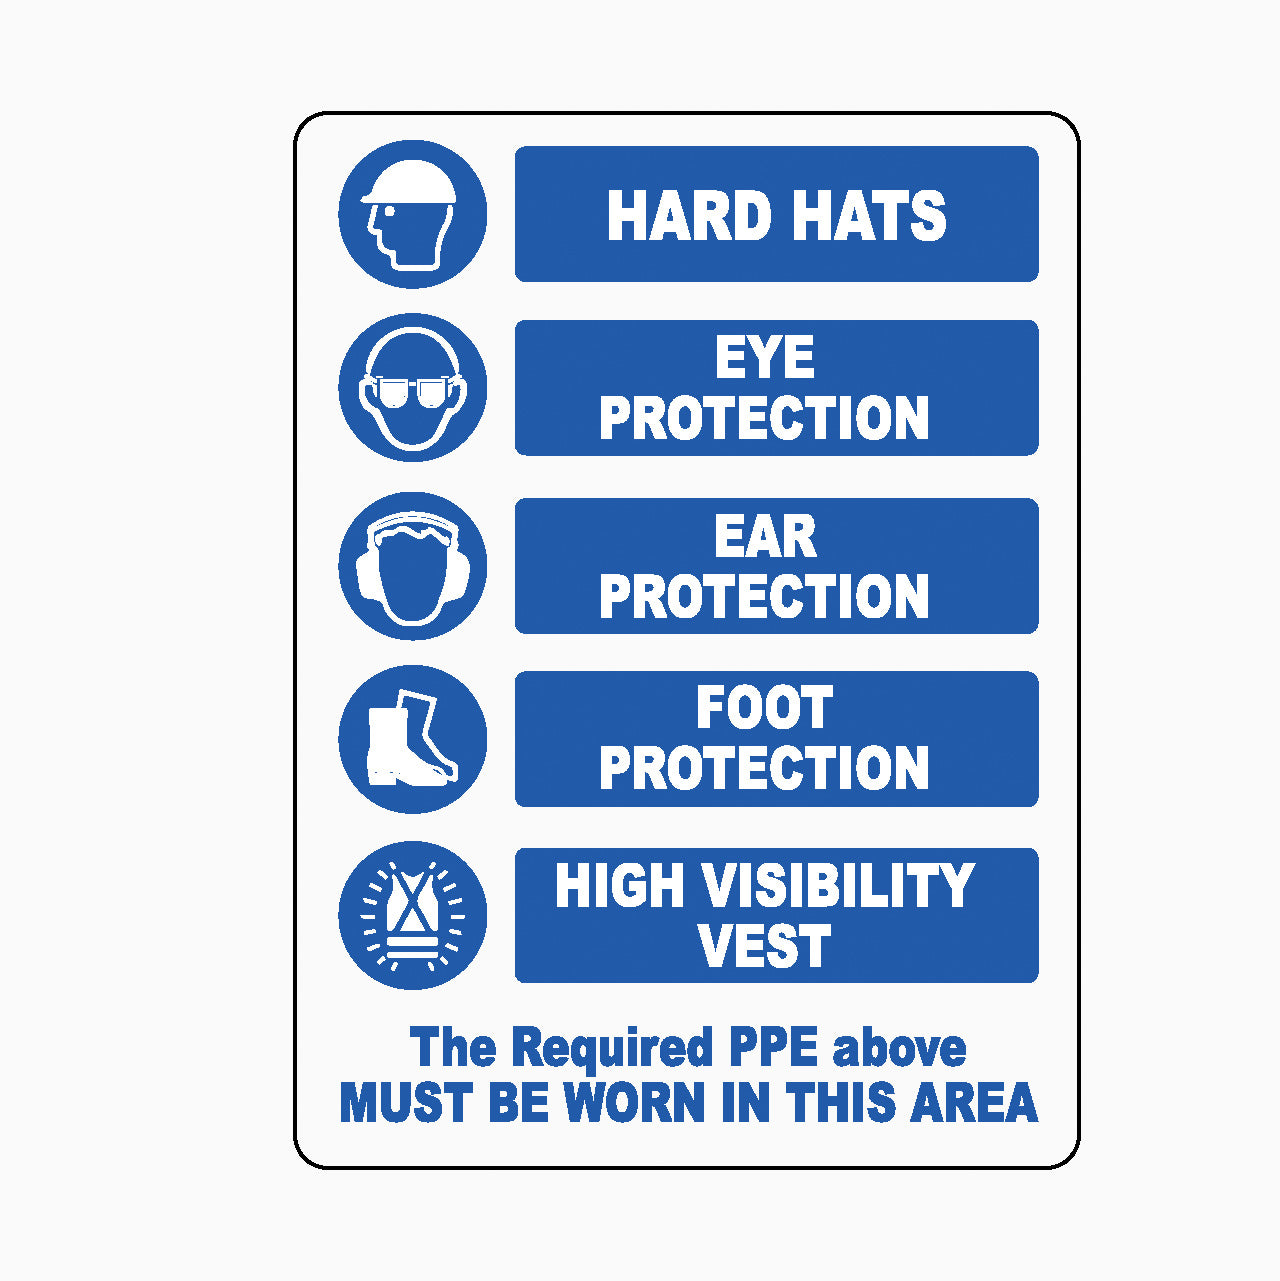 PPE SIGN (Personal Protective Equipment)